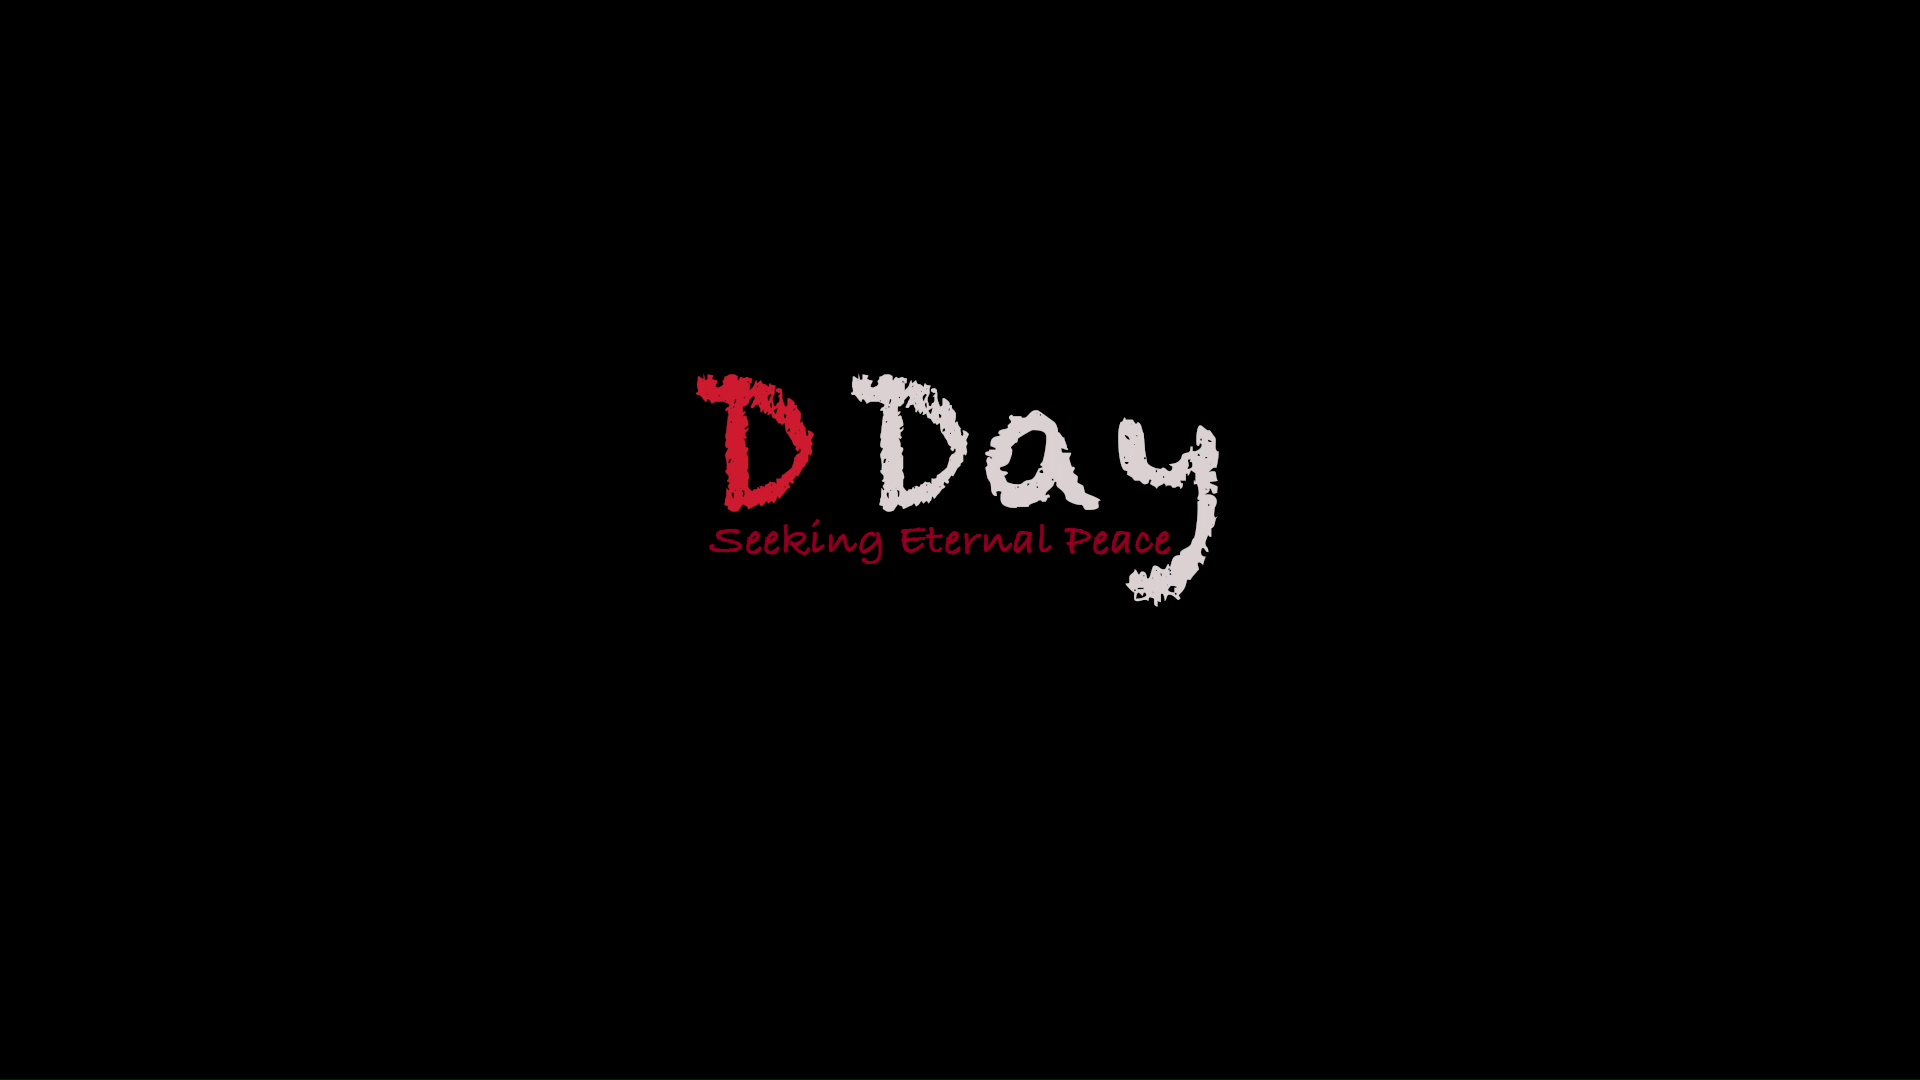 D Day